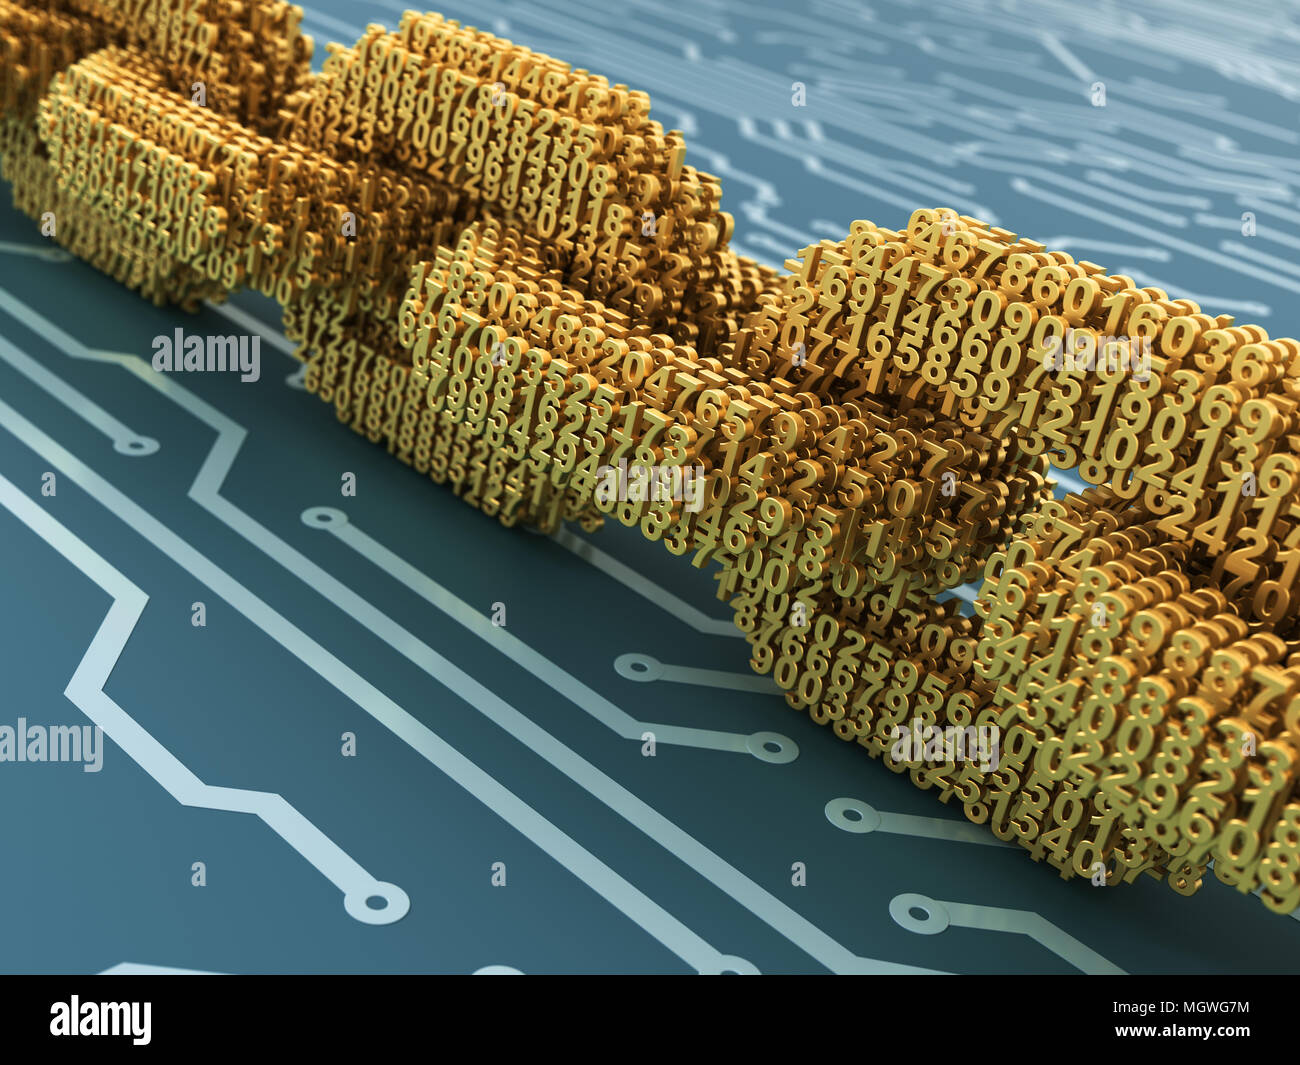 Concept Of Blockchain. Digital Chain Of Interconnected 3D Numbers On Blue Printed Circuit Board. 3D Illustration. Stock Photo